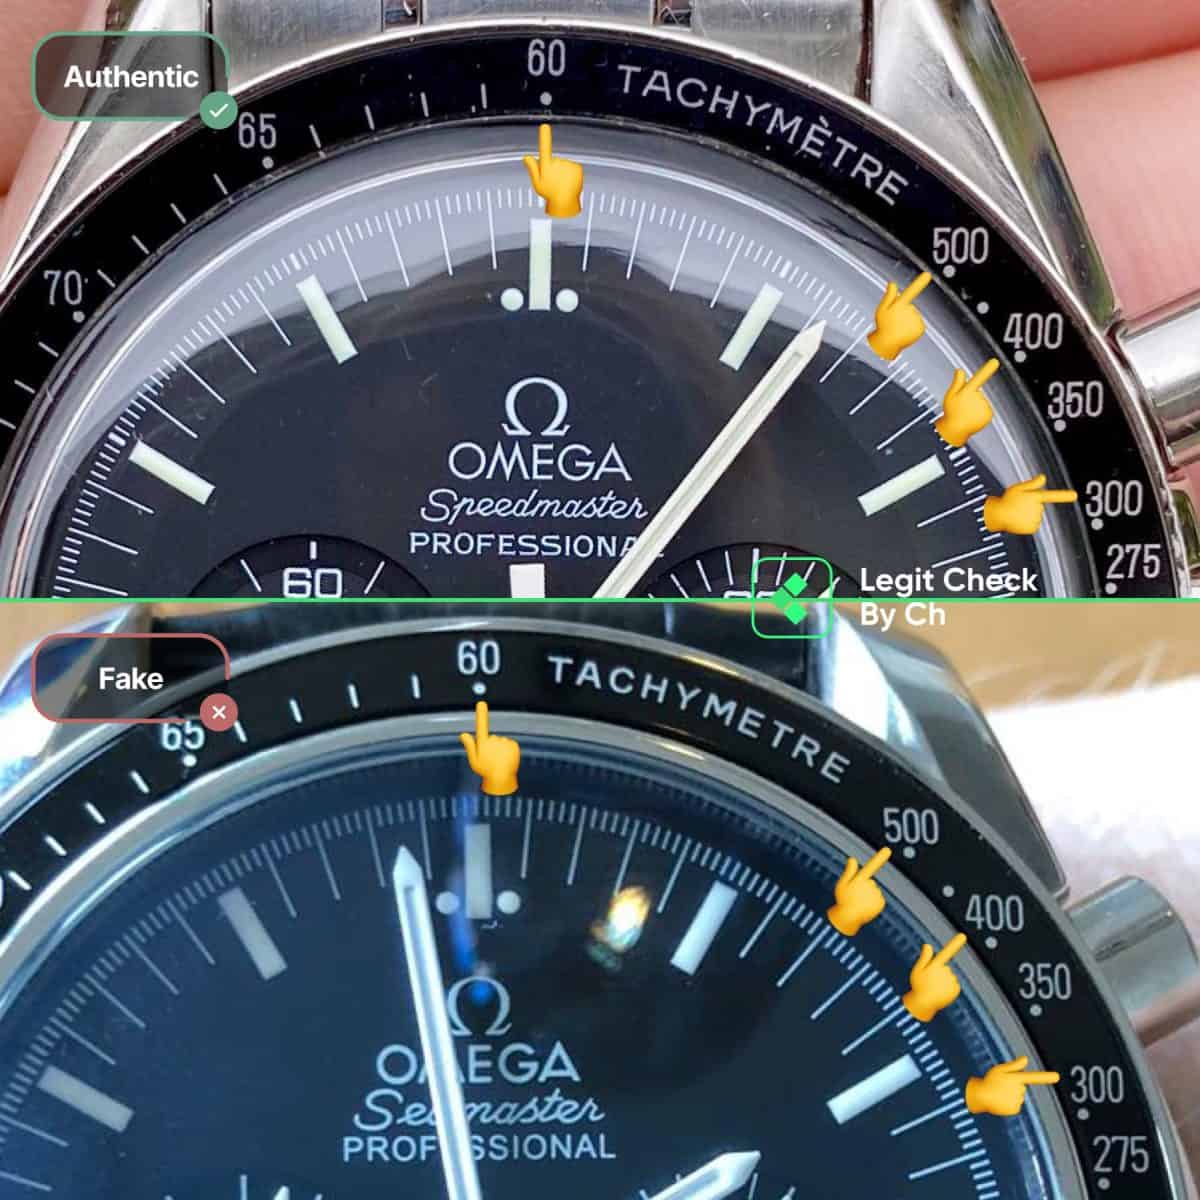 how to authenticate omega speedmaster